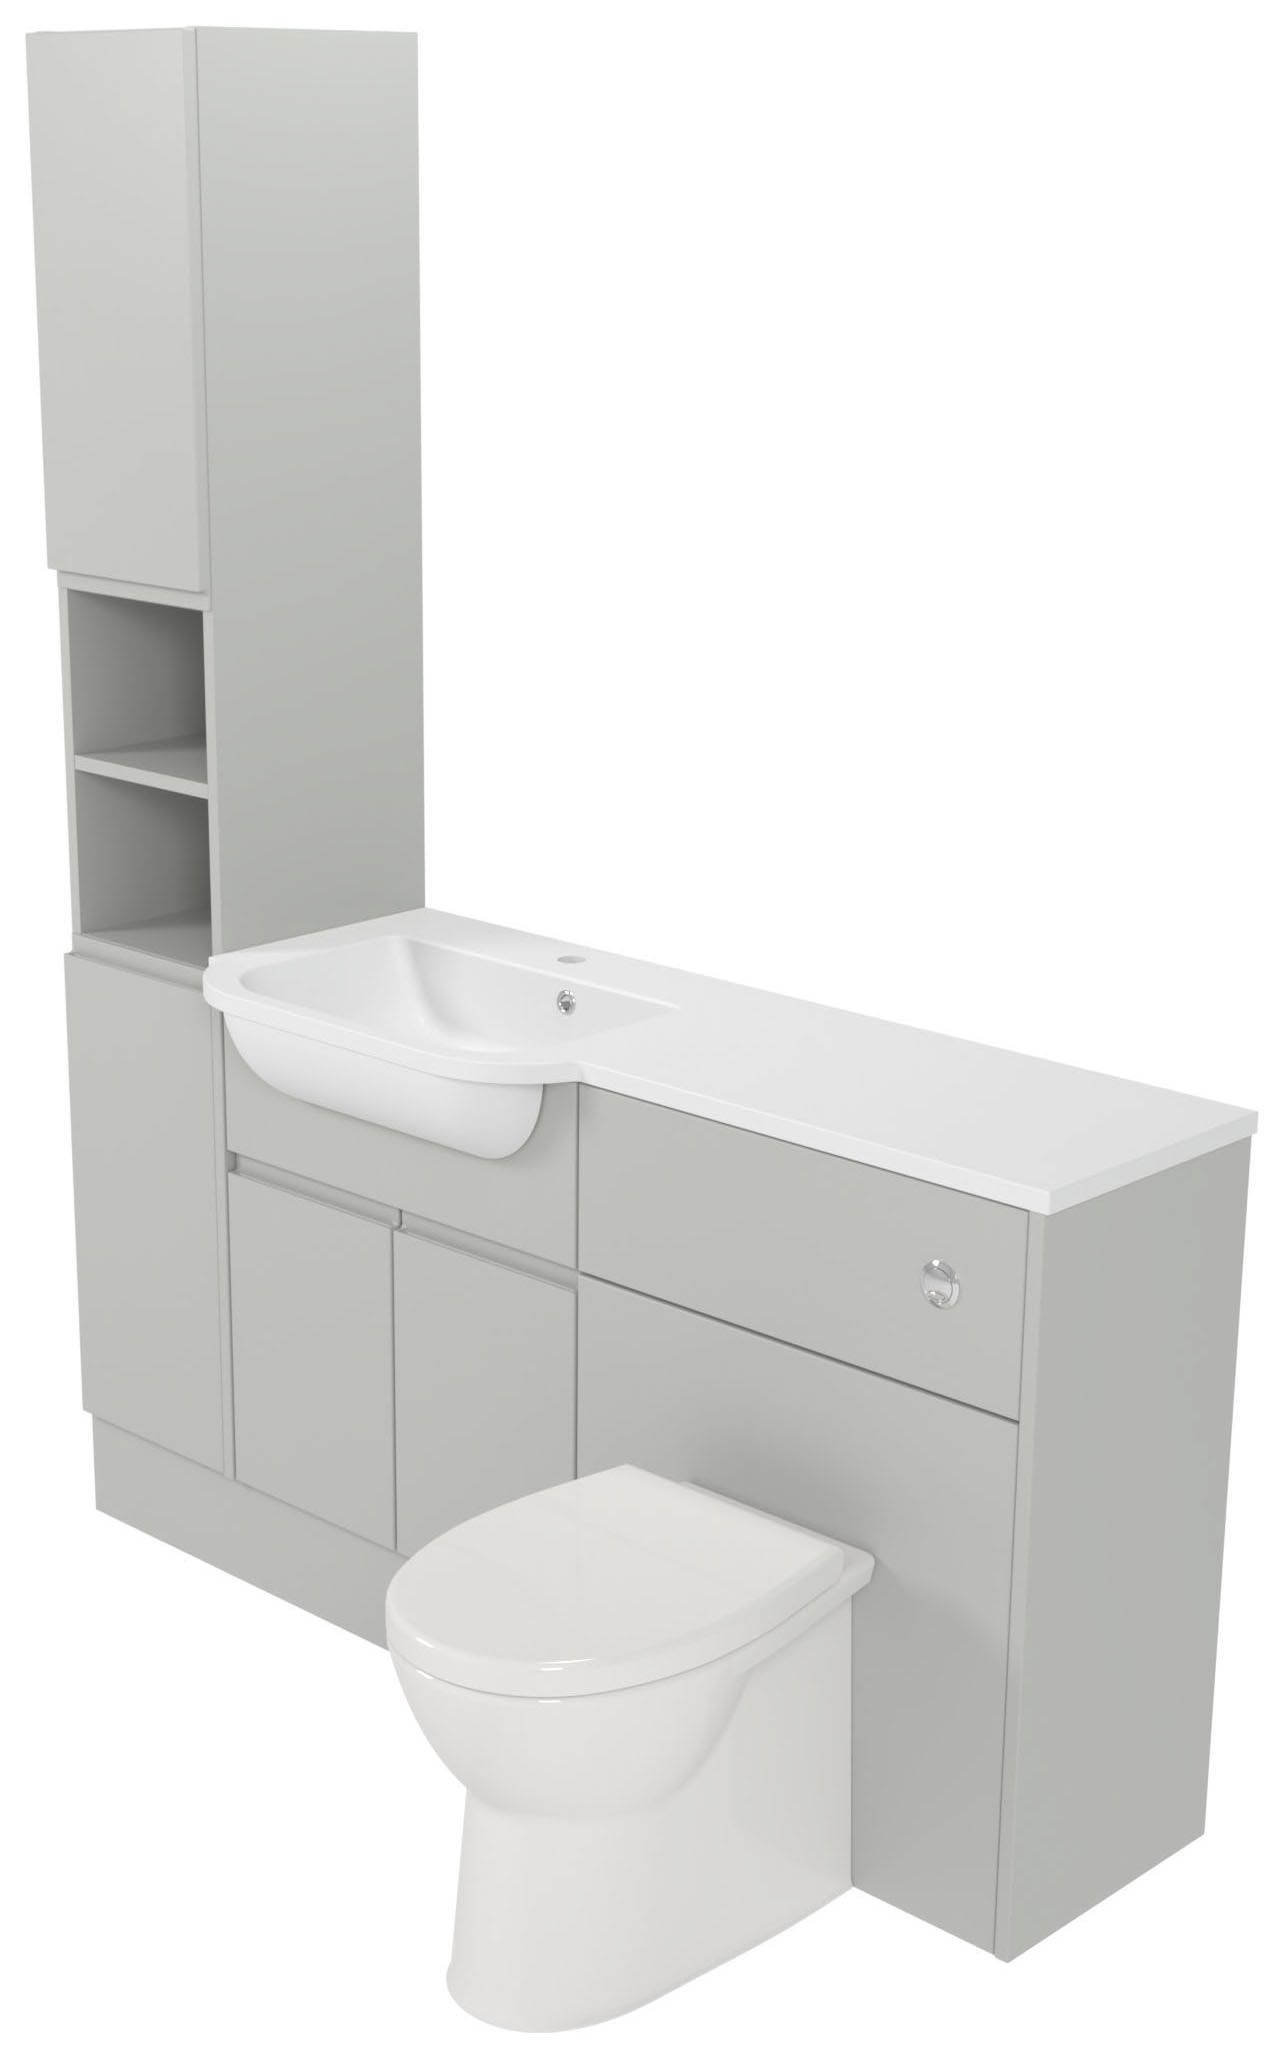 Deccado Clifton Whisper Grey 1500mm Fitted Tower, Vanity & Toilet Pan Unit Combination with Basin